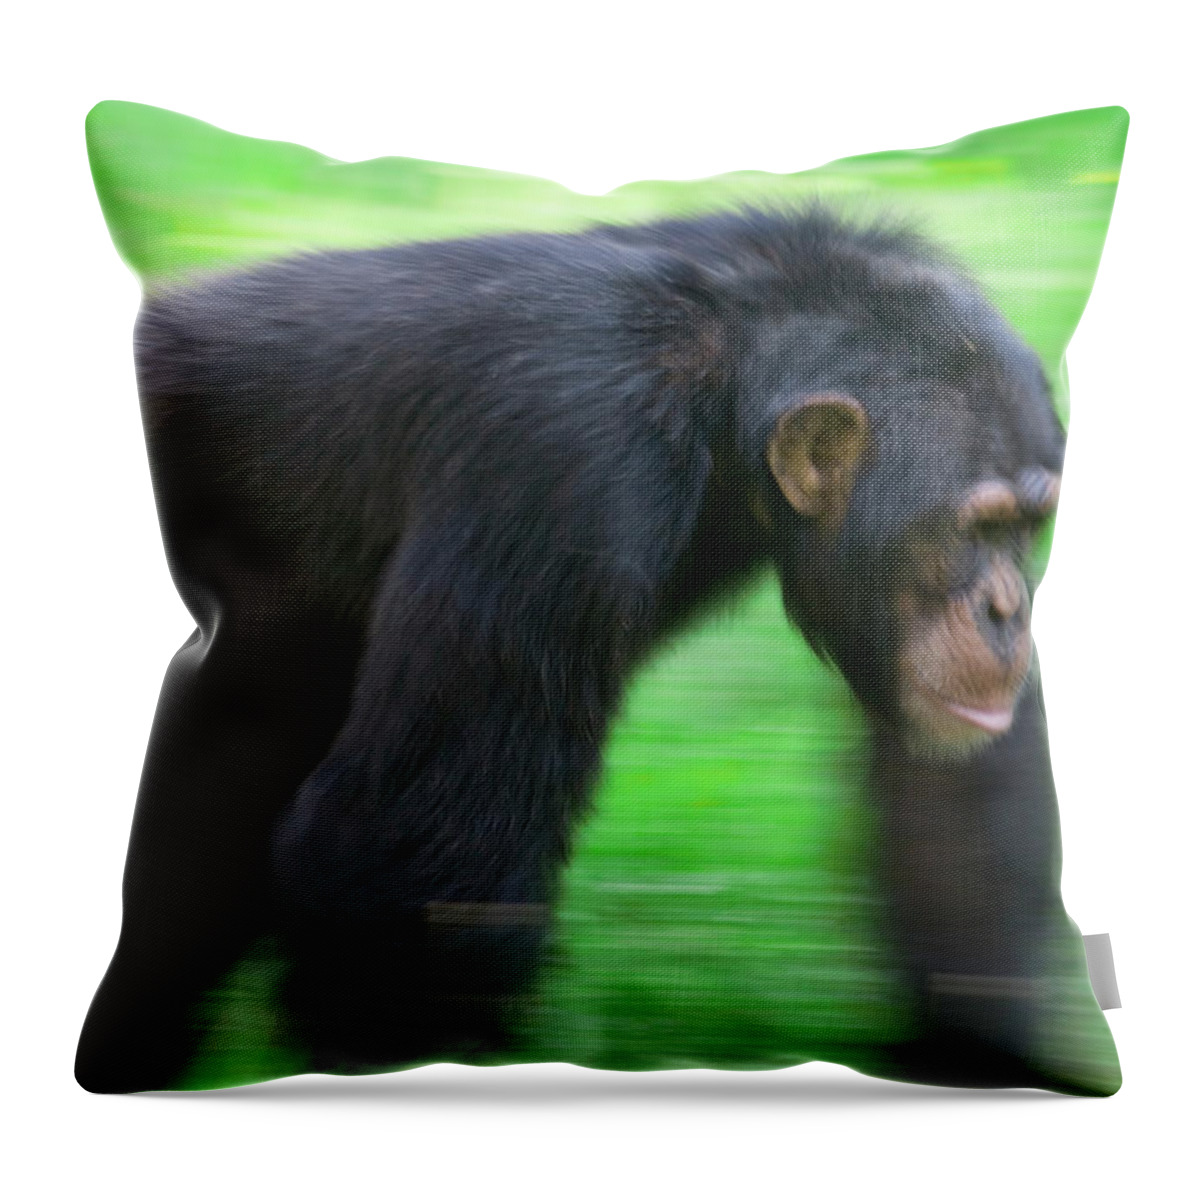 00620539 Throw Pillow featuring the photograph Bonobo Pan Paniscus Knuckle-walking by Cyril Ruoso